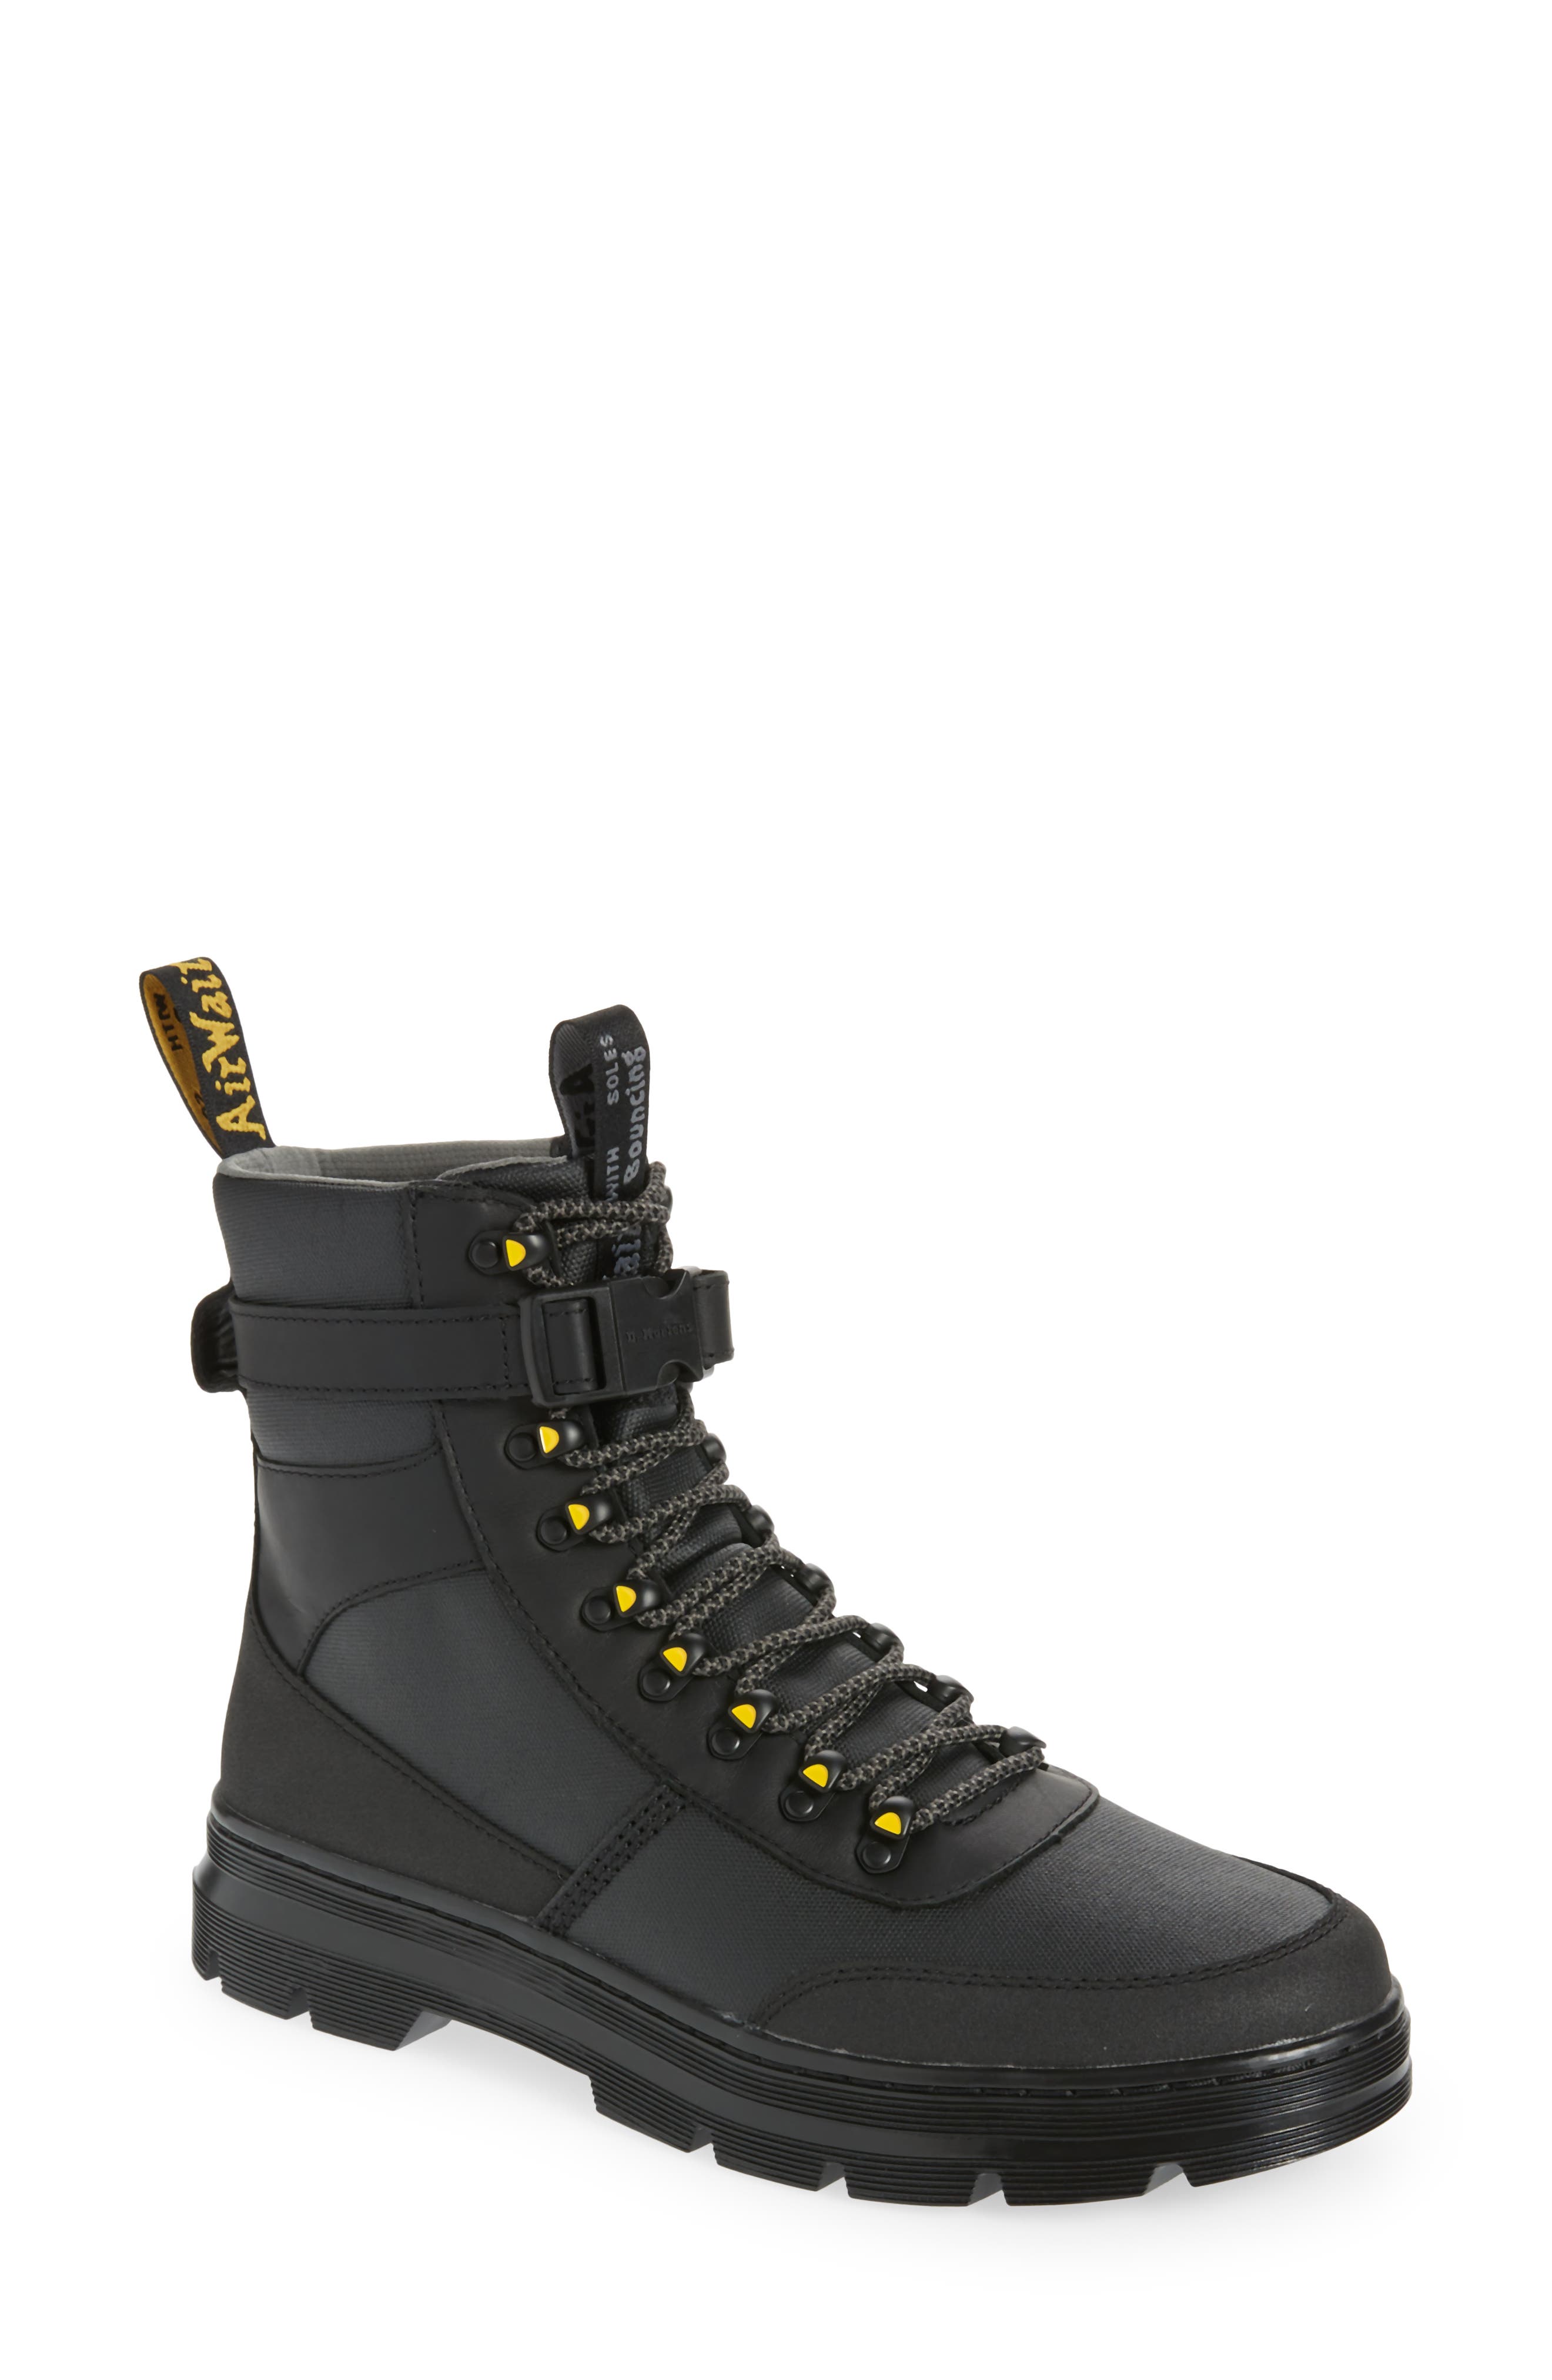 Dr. Martens Combs Tech Combat Boot in Black at Nordstrom, Size 8Us